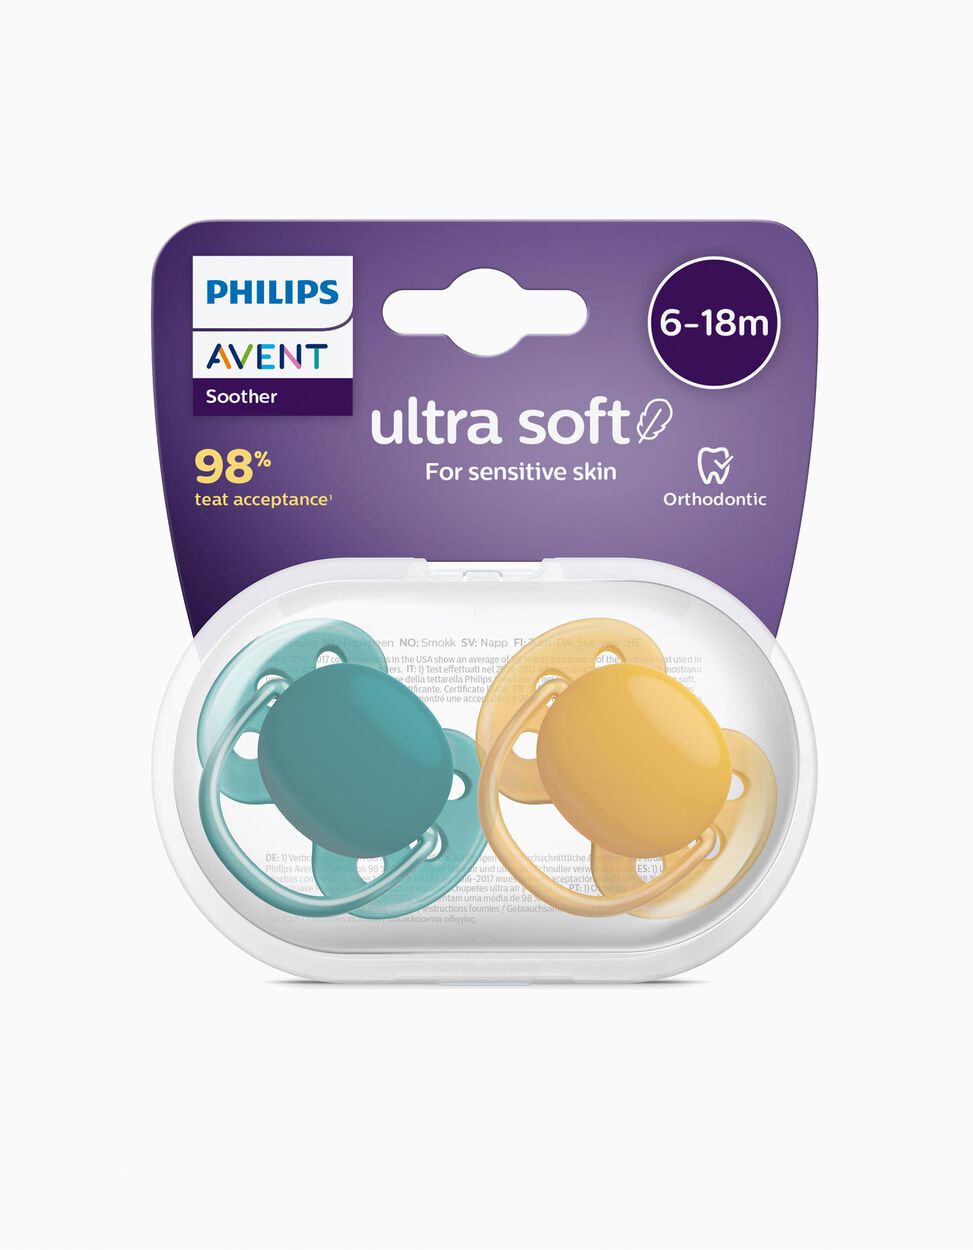 2 Dummies Ultra Soft Silicone 6-18M Philips/Avent